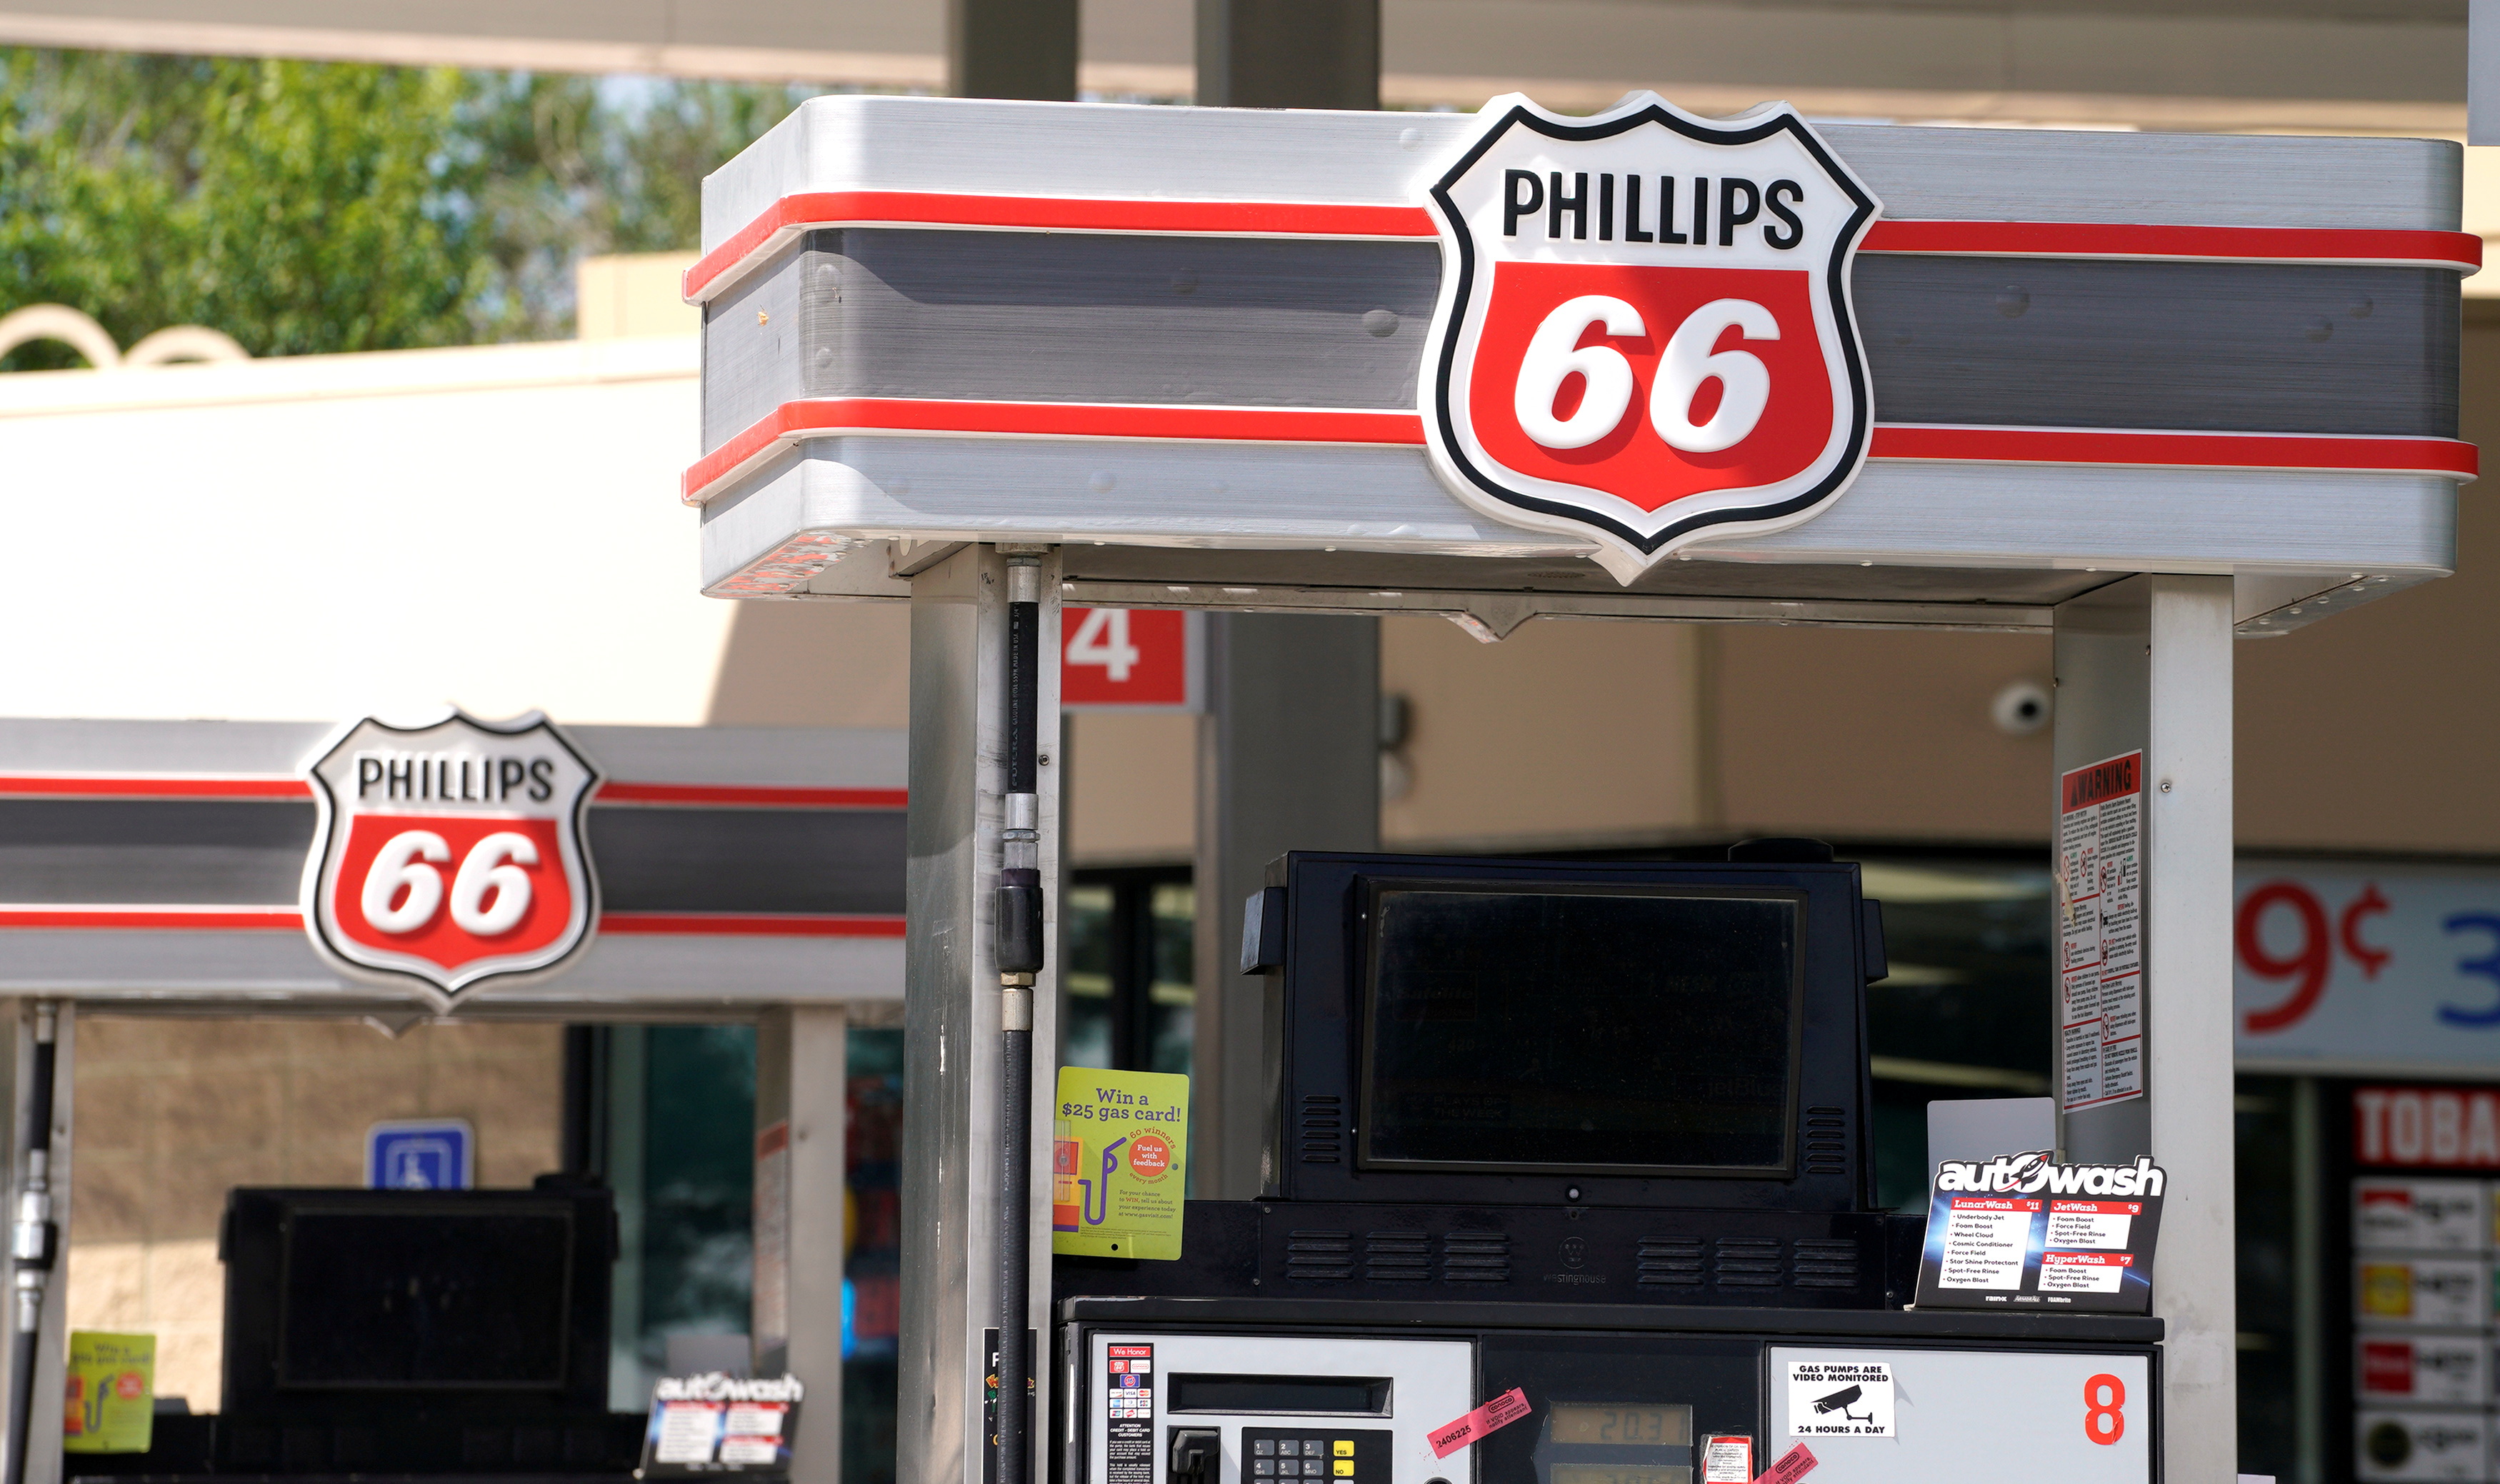 The Phillips 66 gas station in Superior